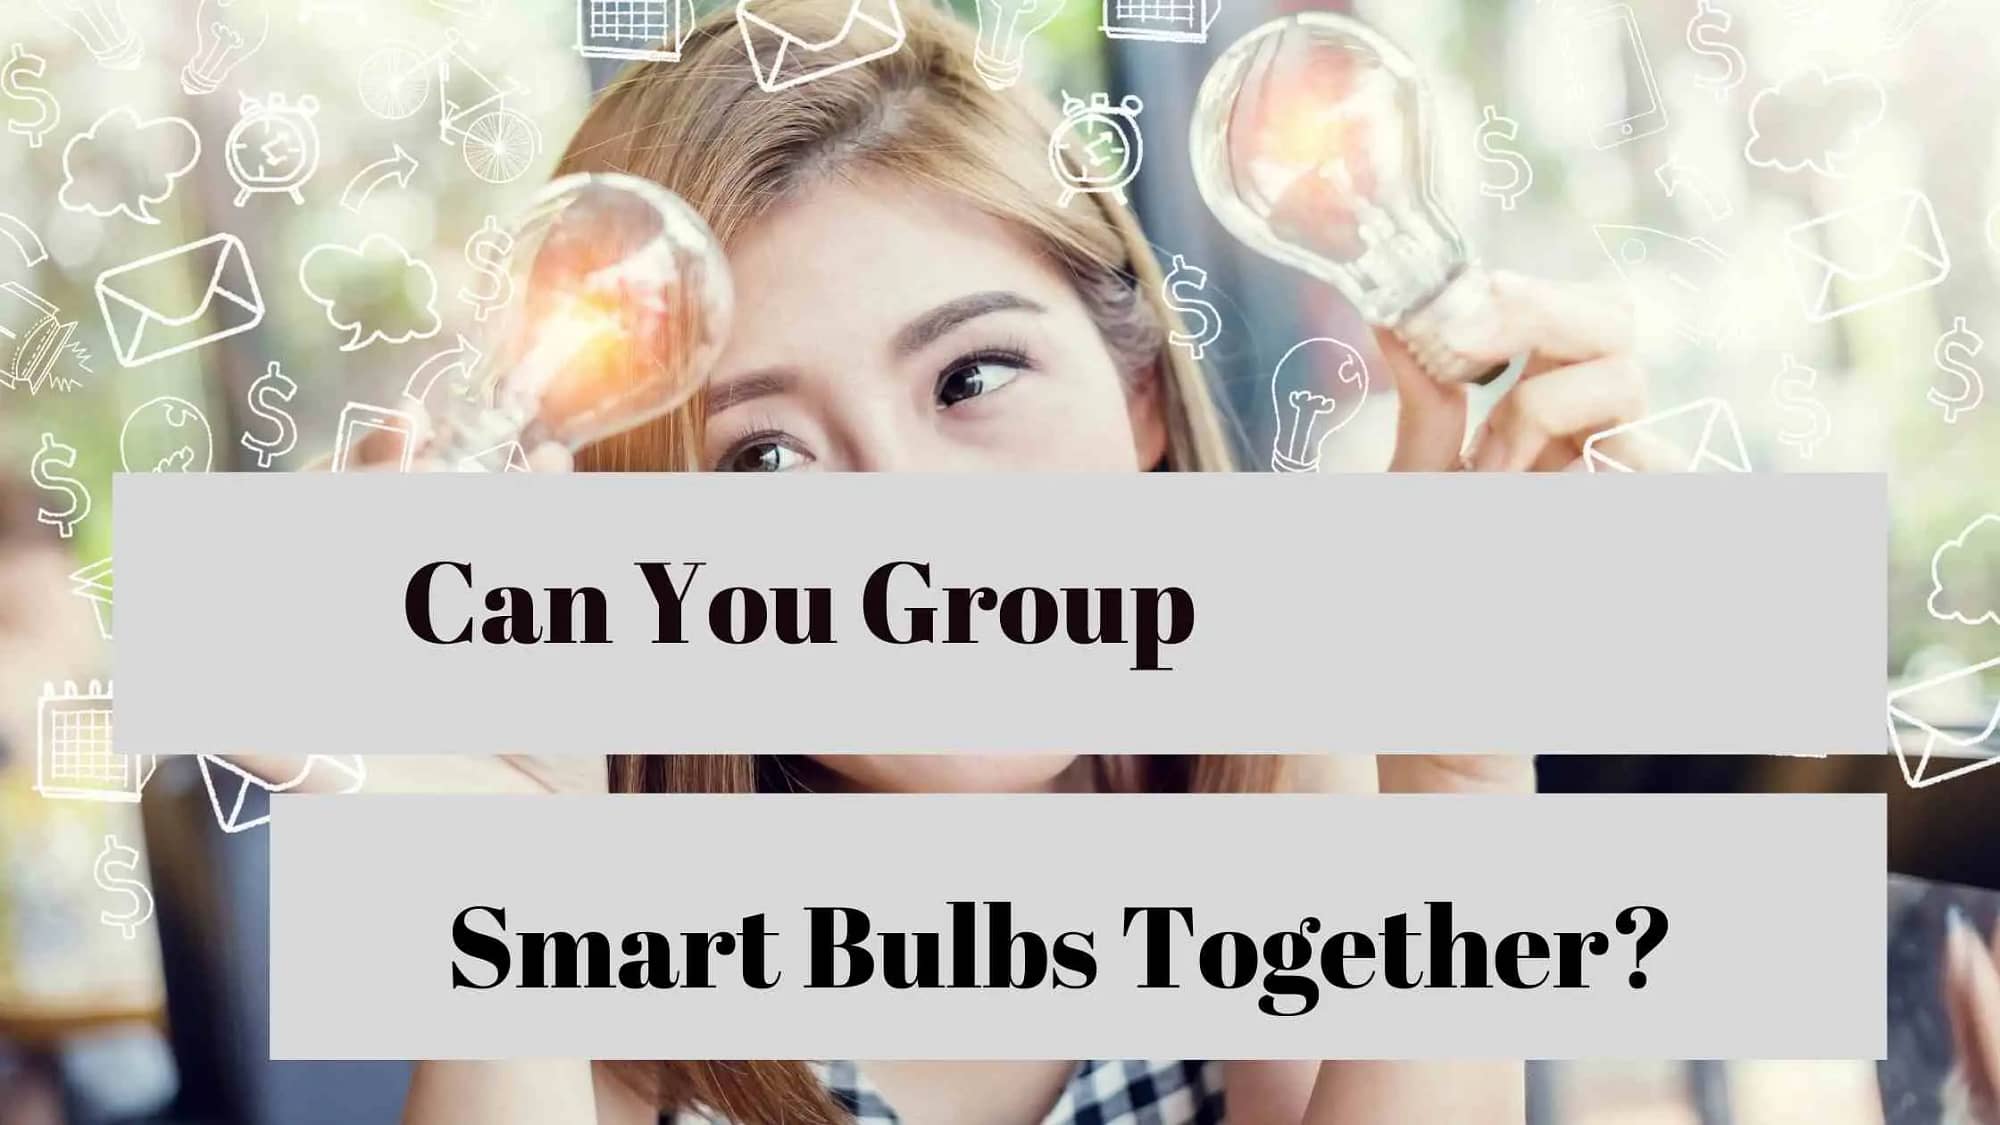 Can You Group Smart Bulbs Together?